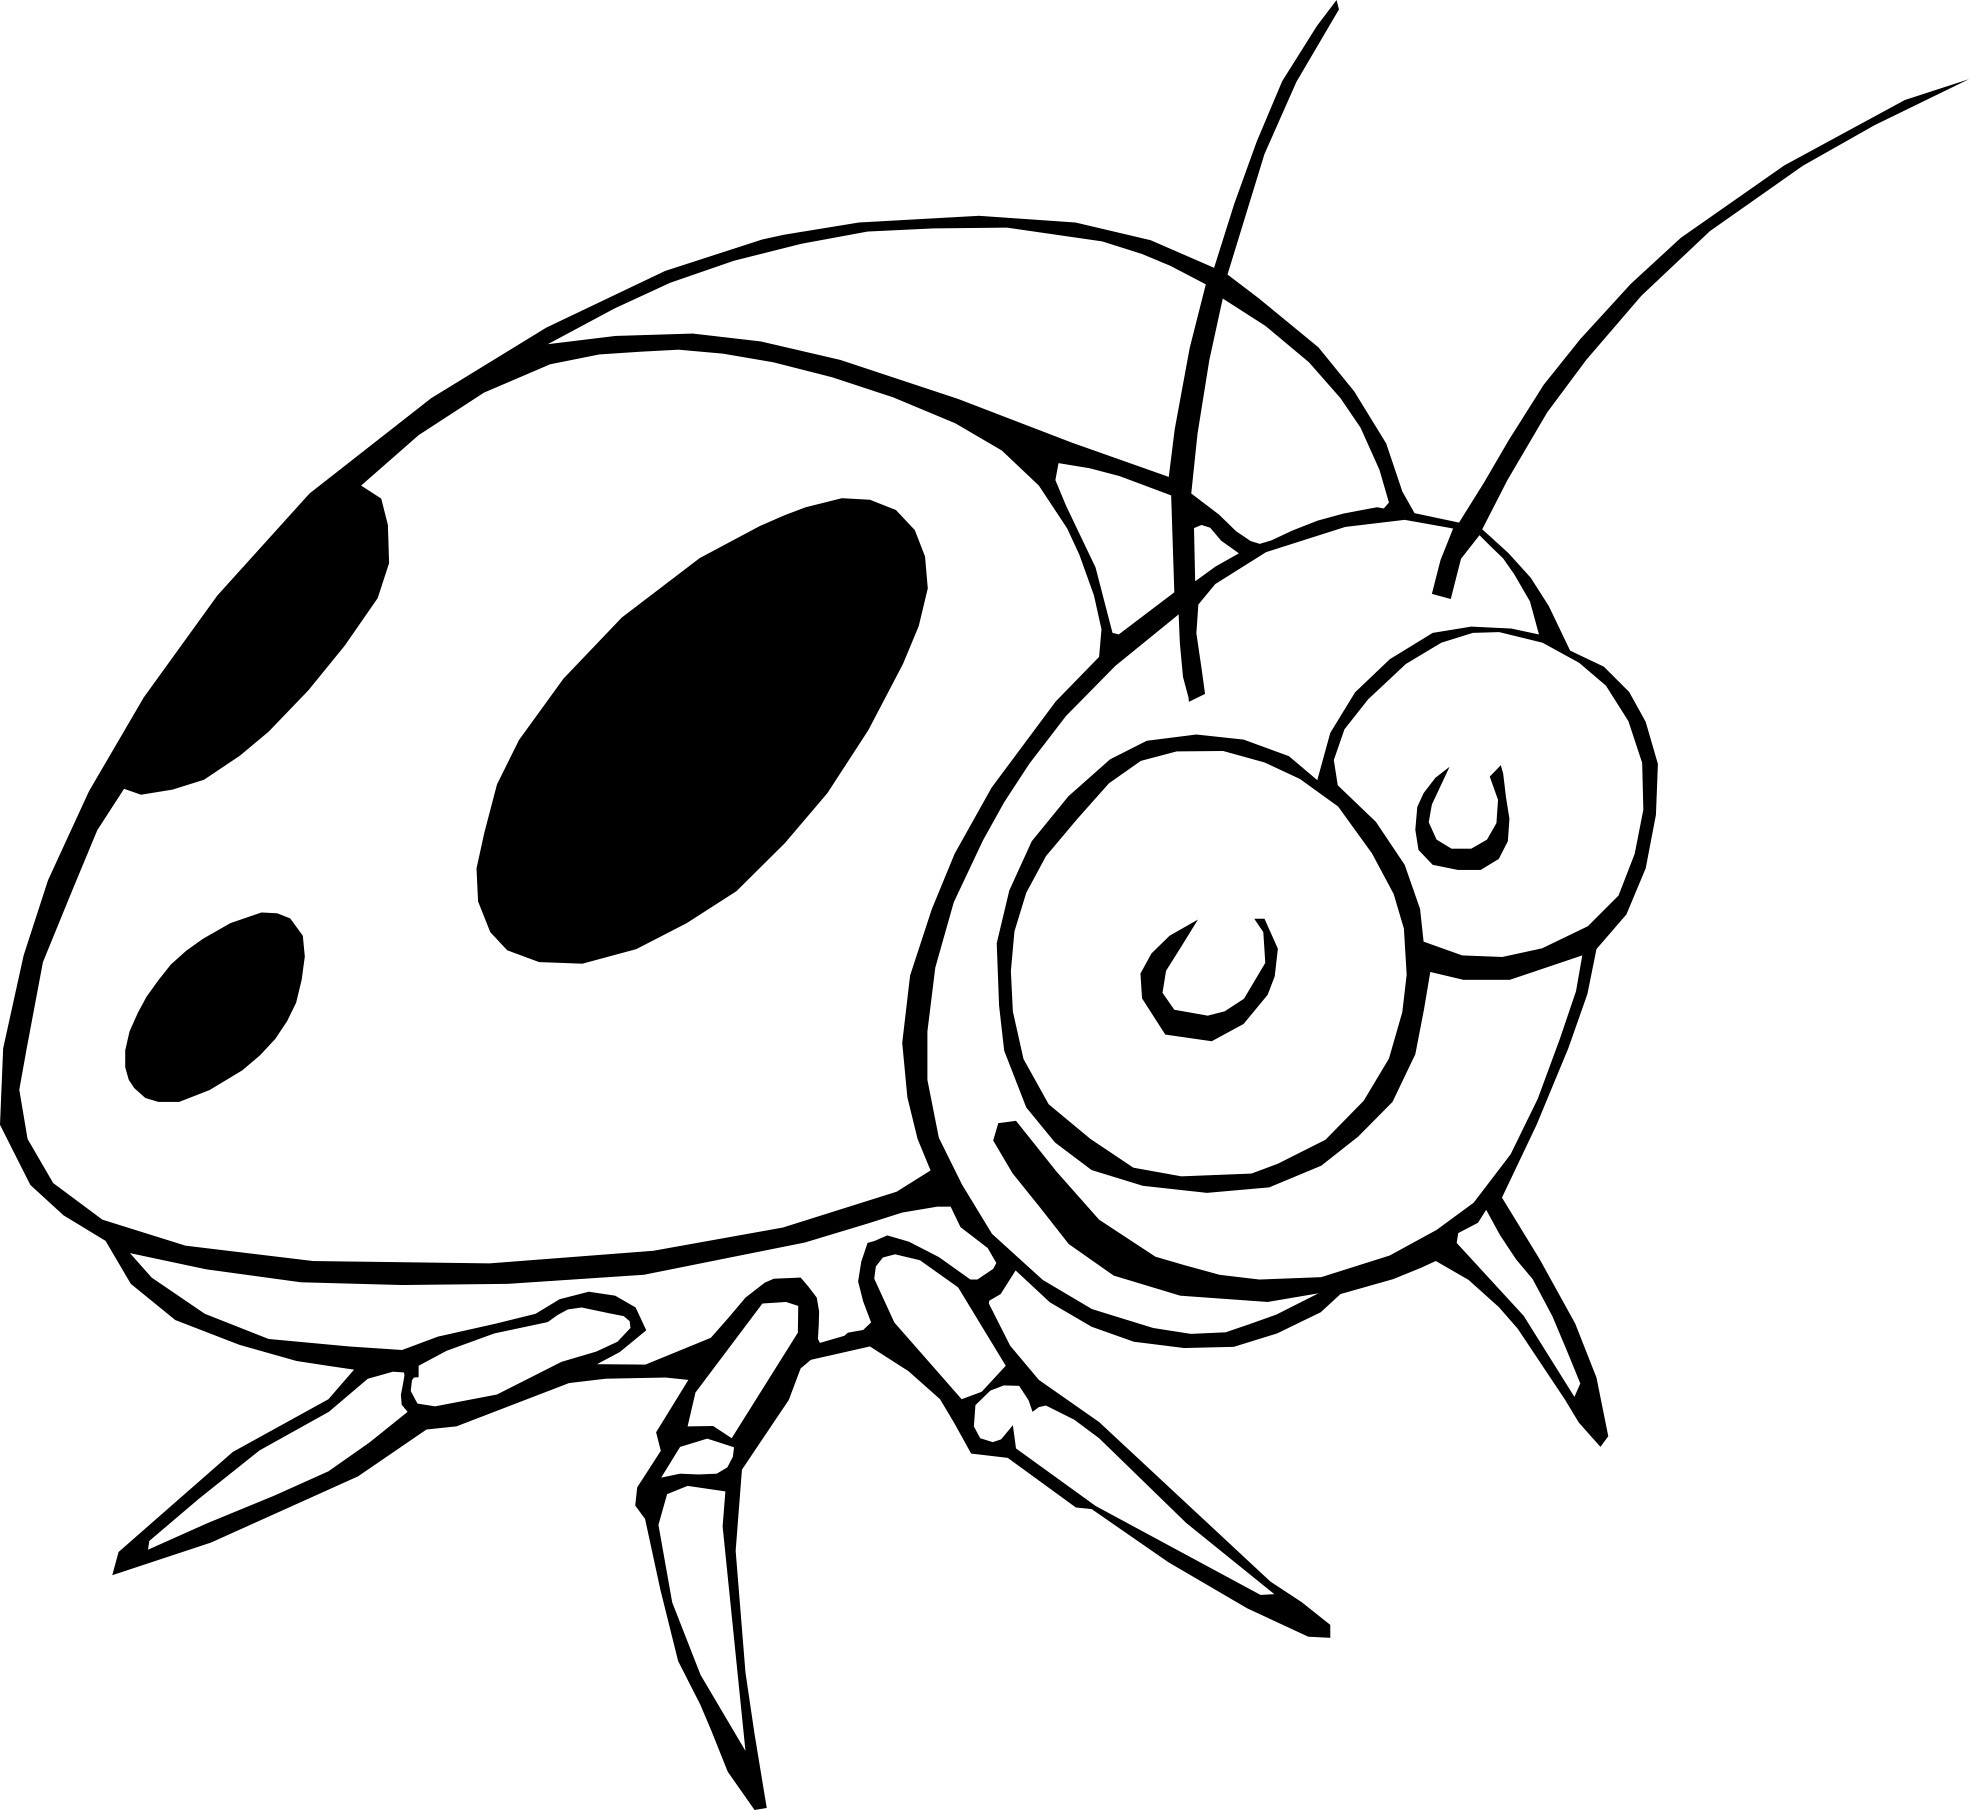 Ladybug Coloring Pages For Kids
 Free Printable Ladybug Coloring Pages For Kids